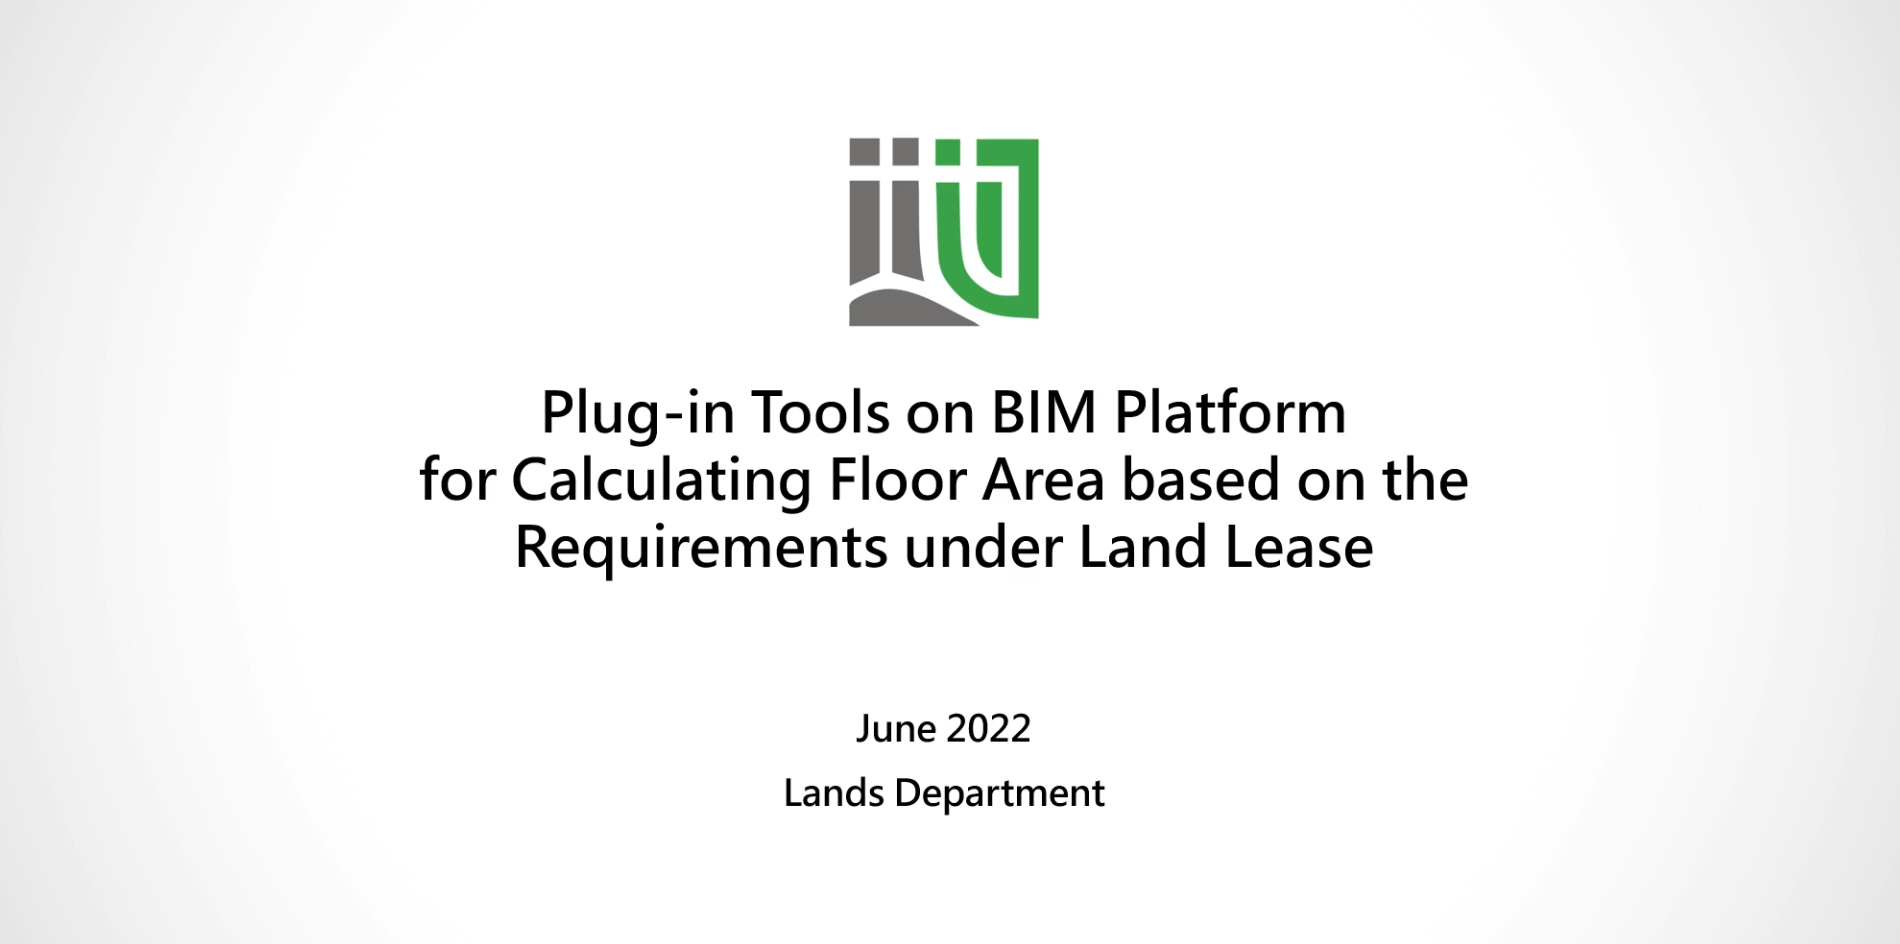 Plug-in Tools on BIM Platform for Calculating Floor Area based on the Requirements under Land Lease